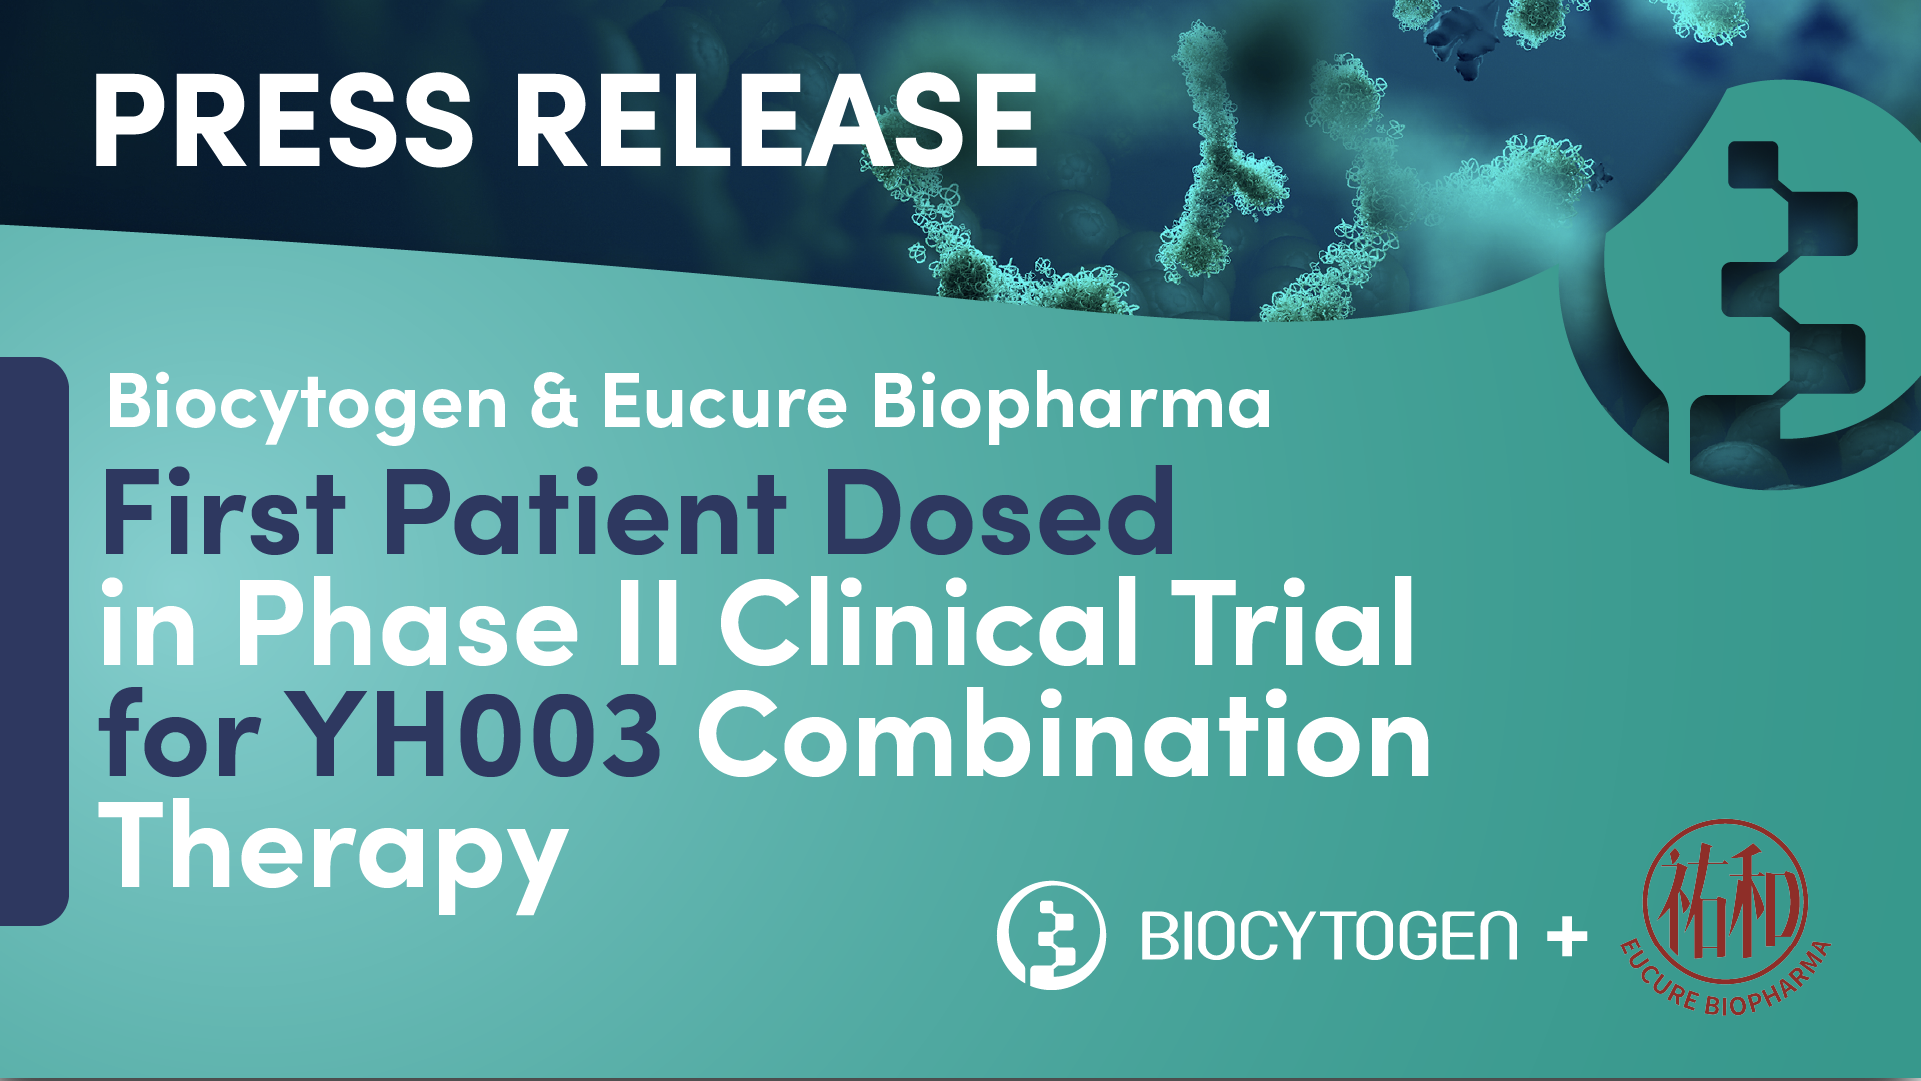 Biocytogen/Eucure Biopharma Announce First Patient Dosed in Phase II Clinical Trial of YH003 Combination Therapy as a First-Line Treatment for Mucosal Melanoma